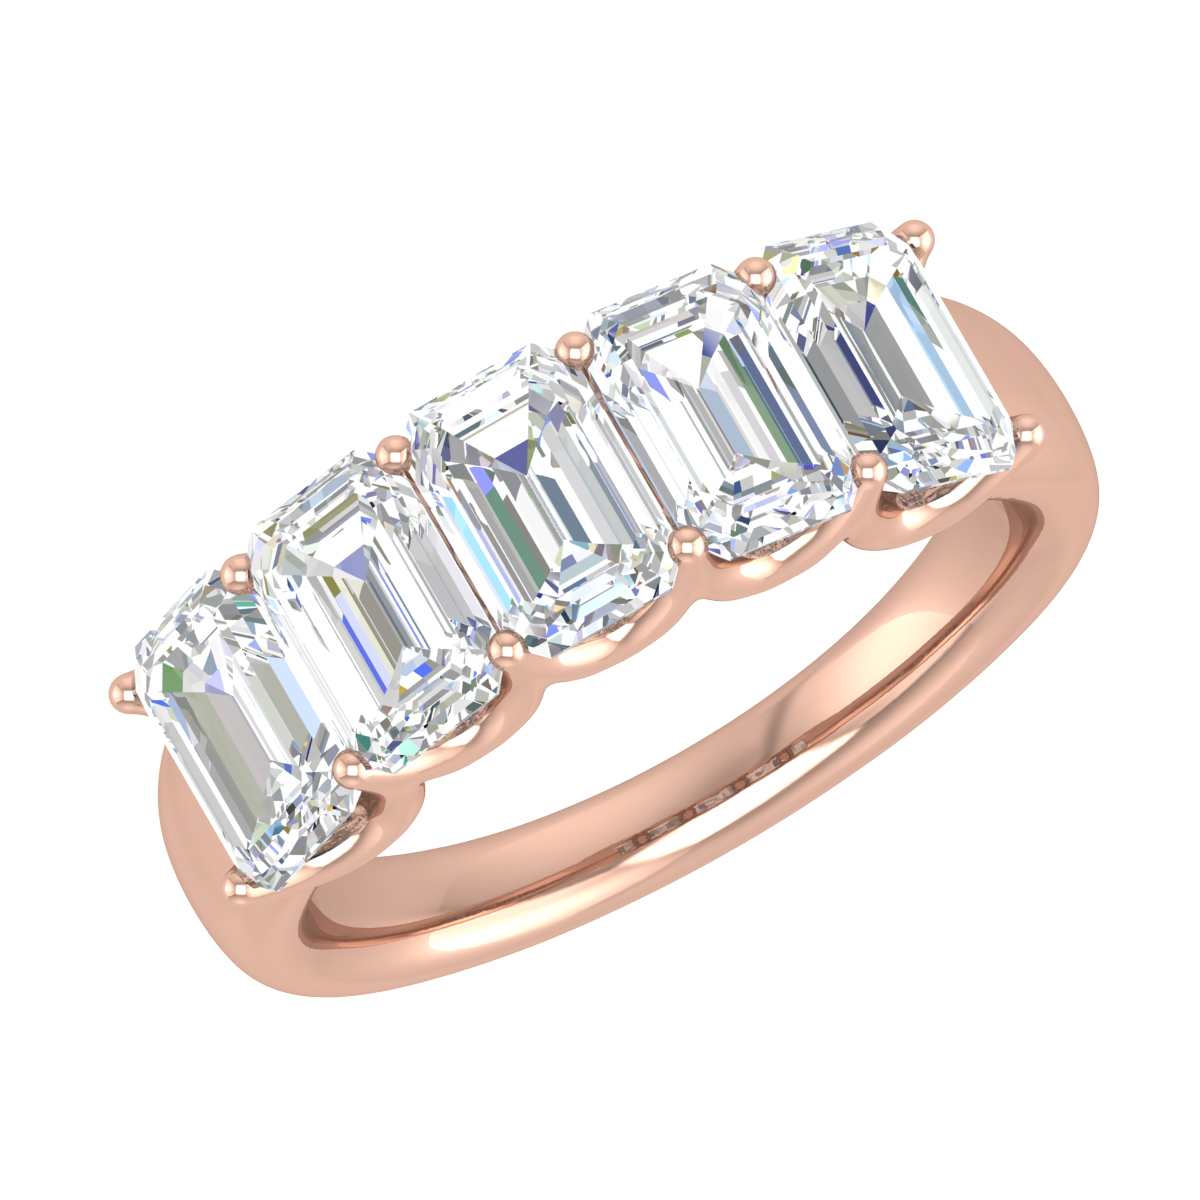 Buy Diamond Classic Ring Online in India | 350+ Designs @ Best Price |  Candere by Kalyan Jewellers